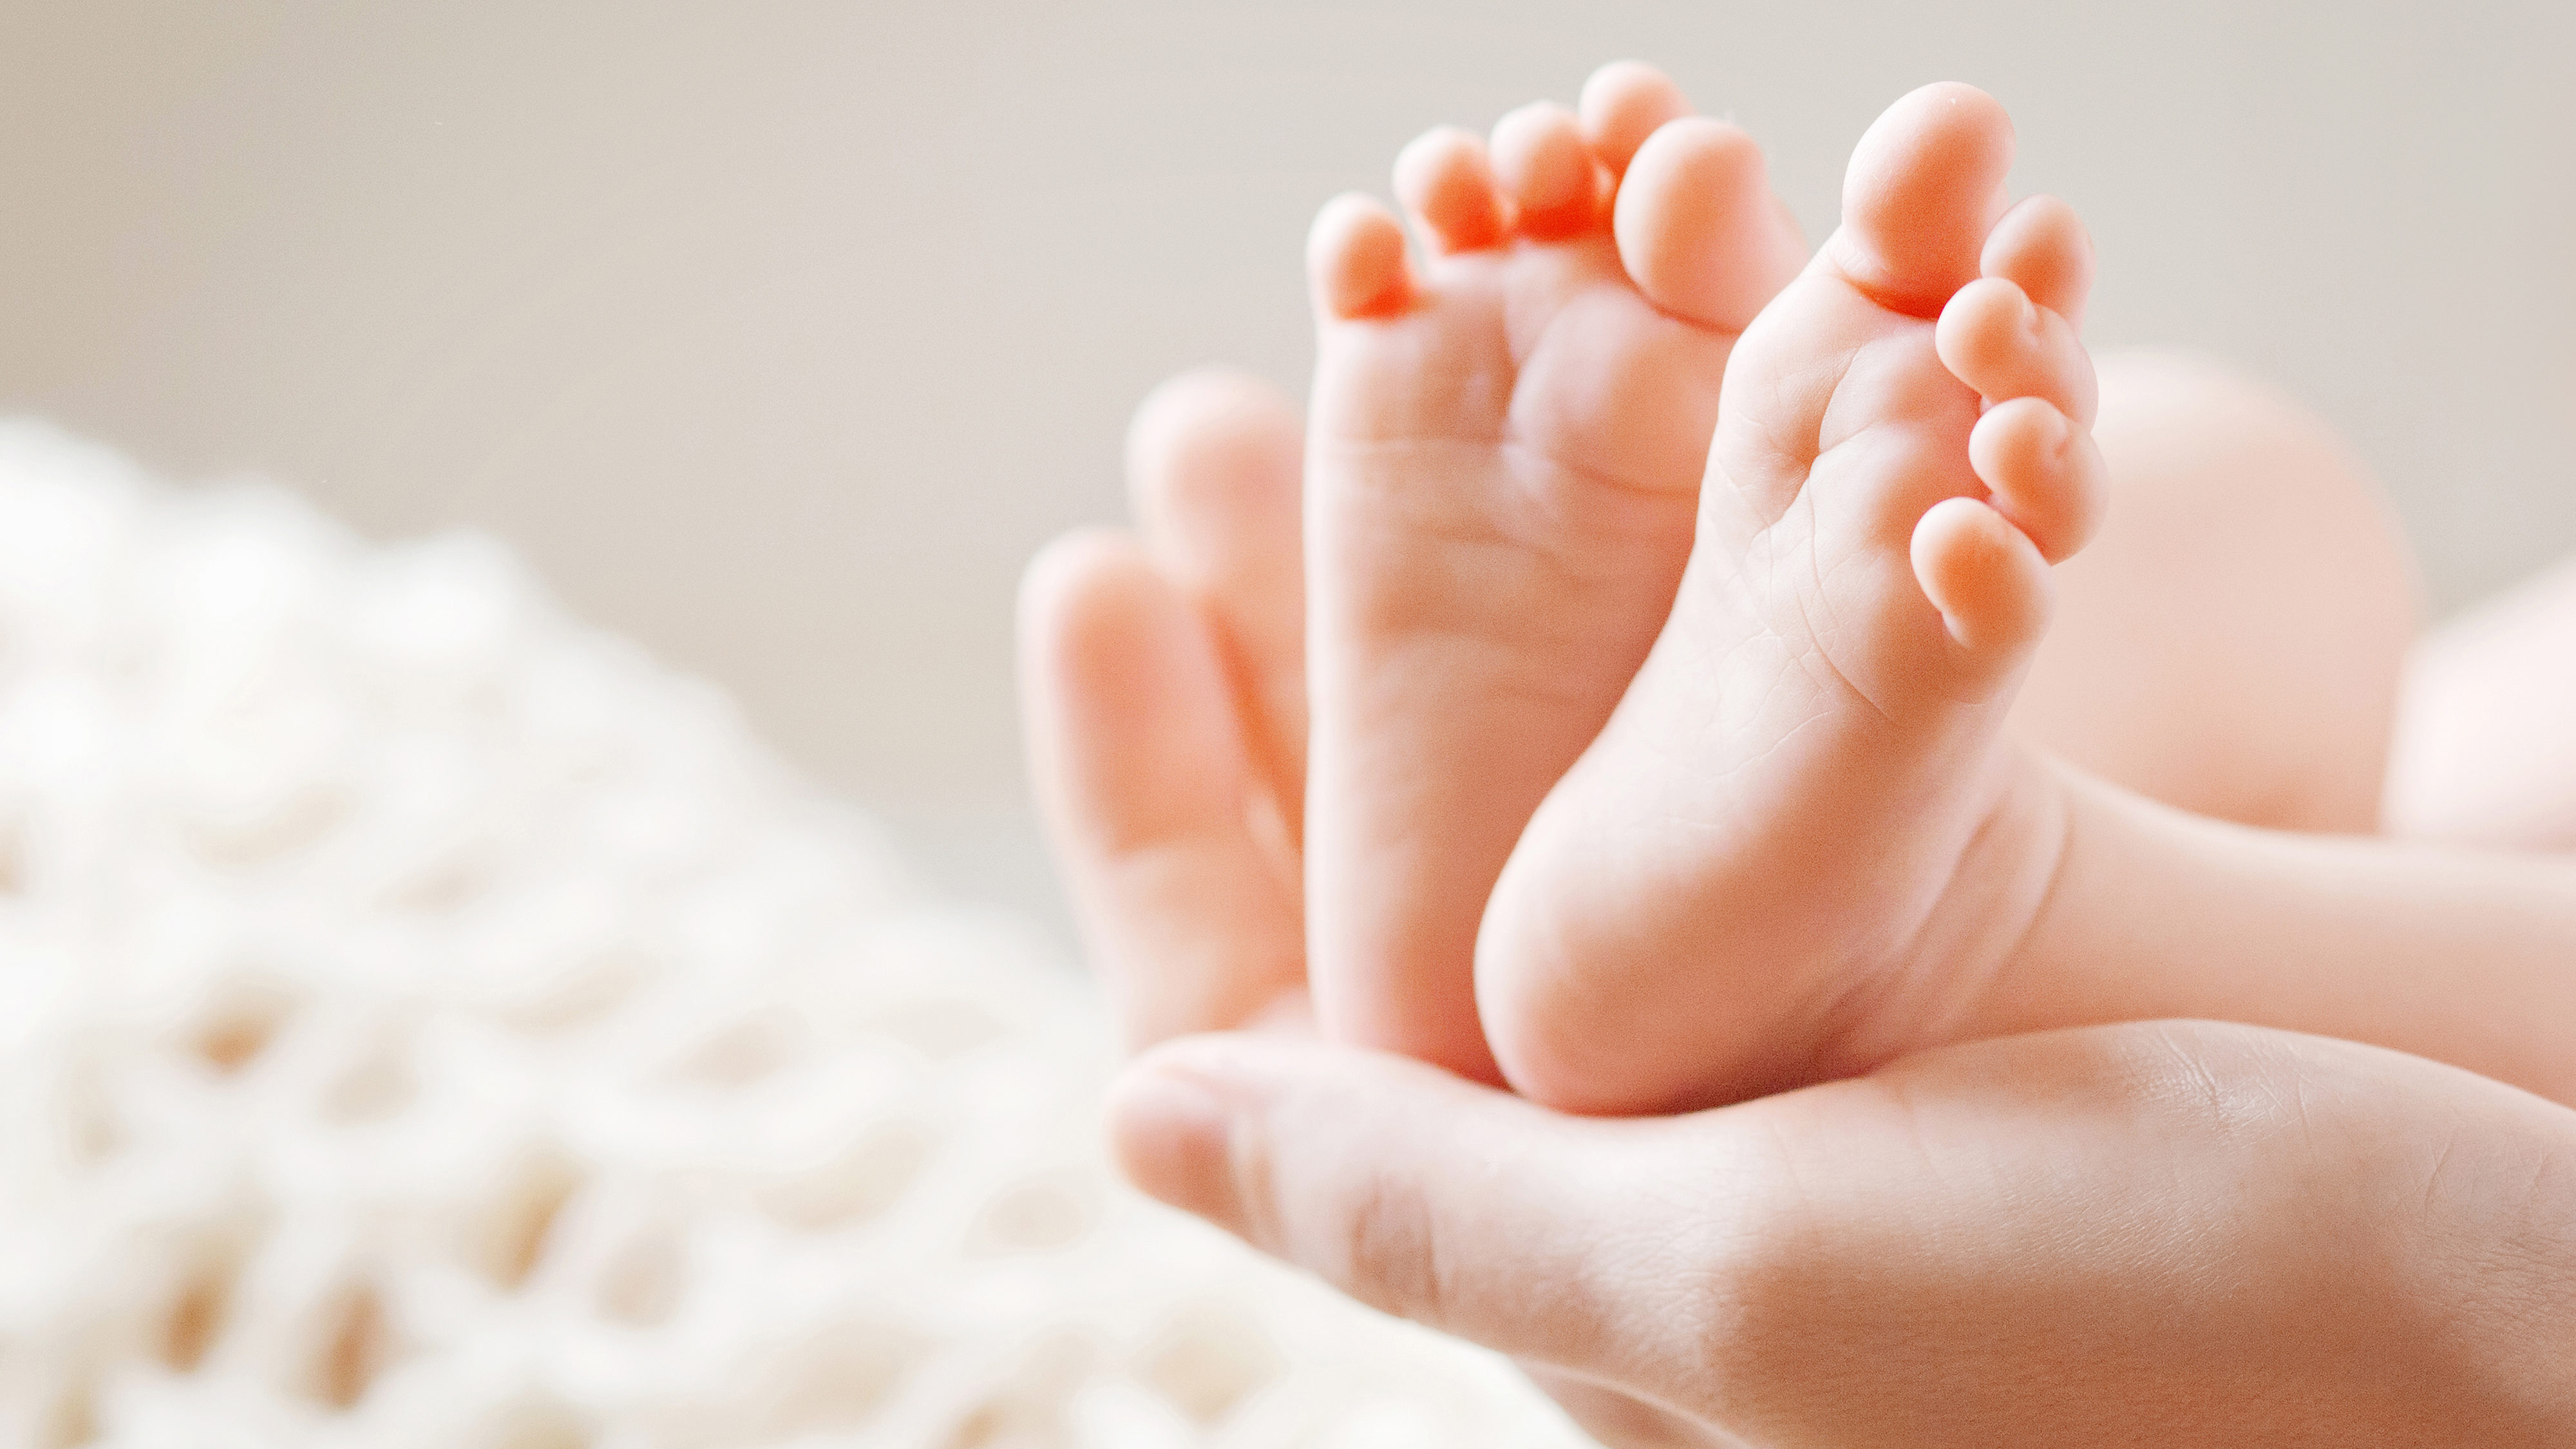 baby feet pictured, utah fertility rates are dropping...